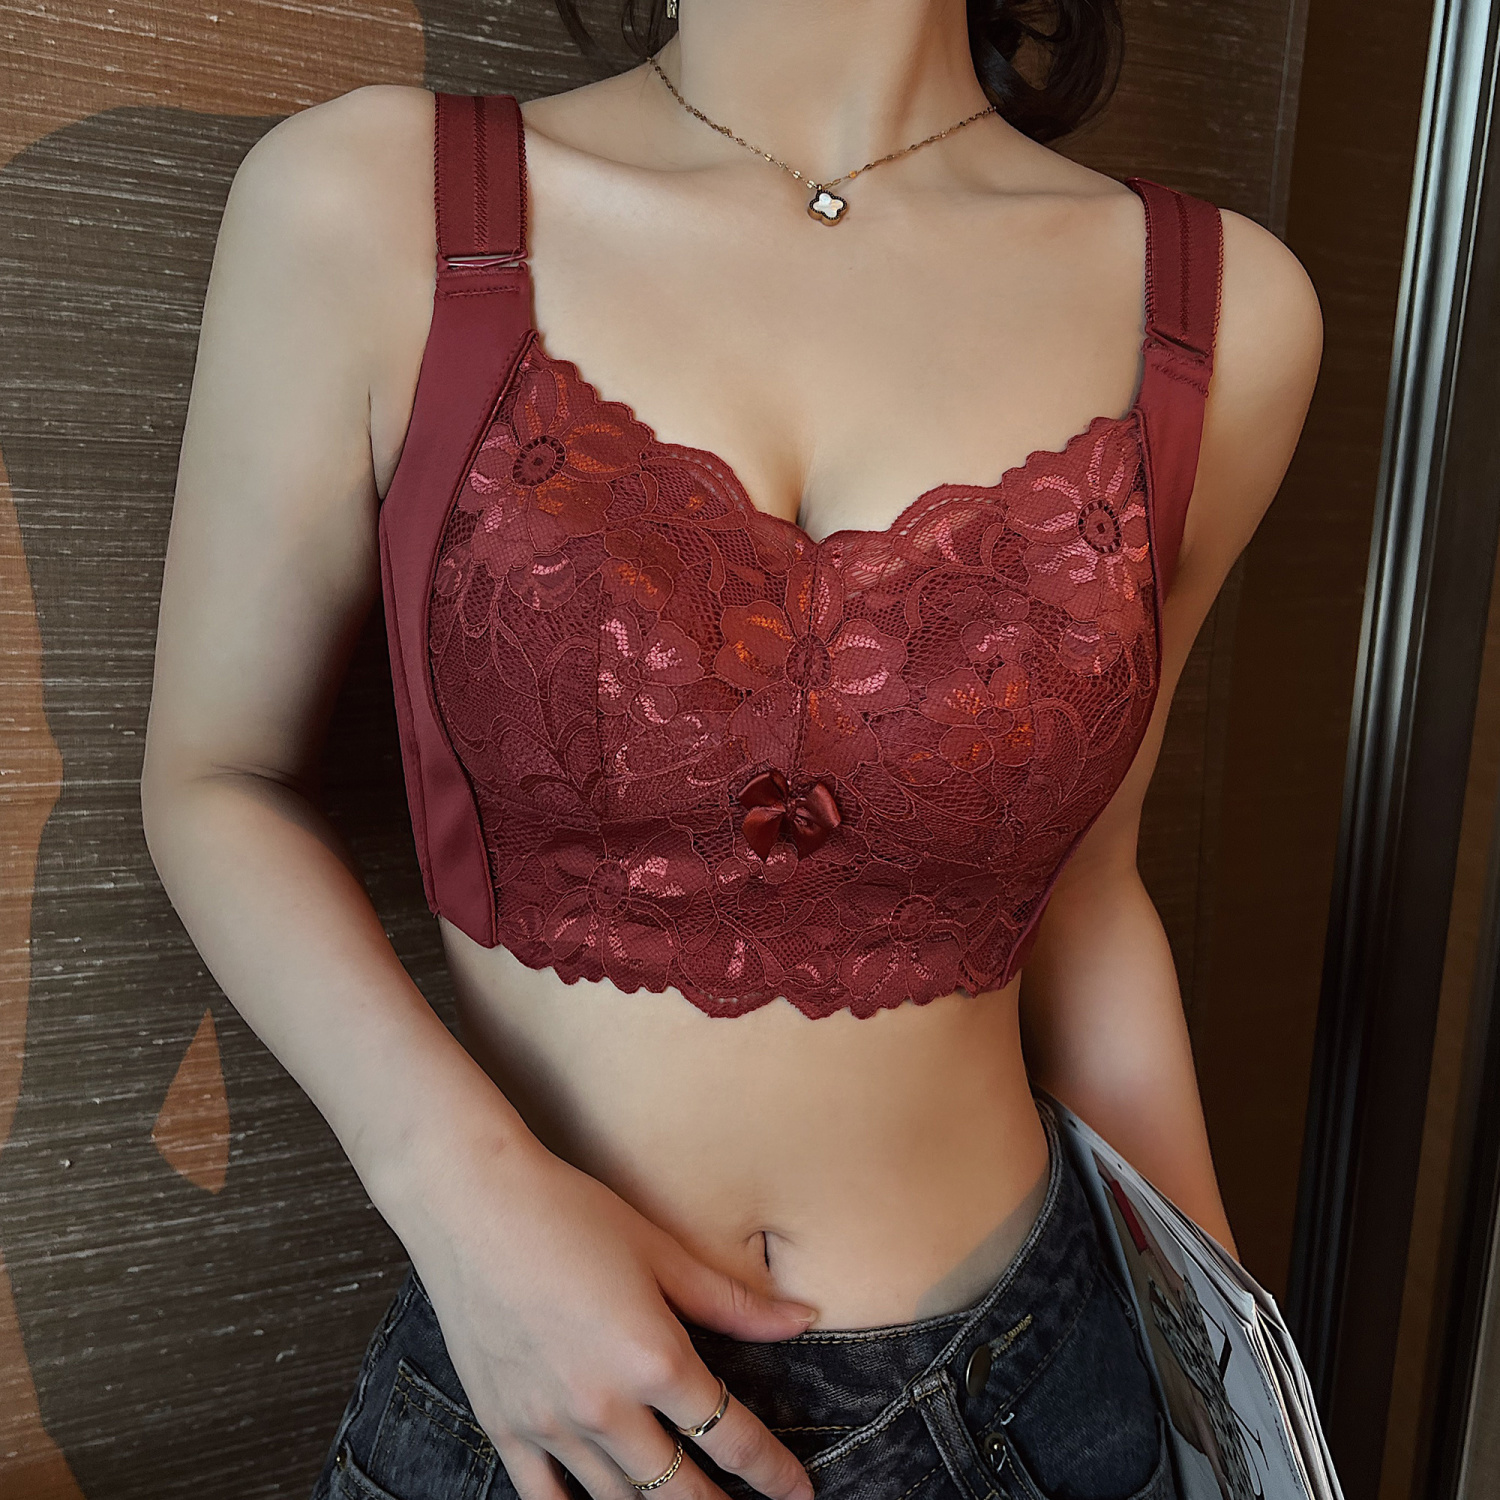 Birth year underwear women's thin section to receive pair of breasts anti-sagging no steel ring big chest showing small bra wedding bride red